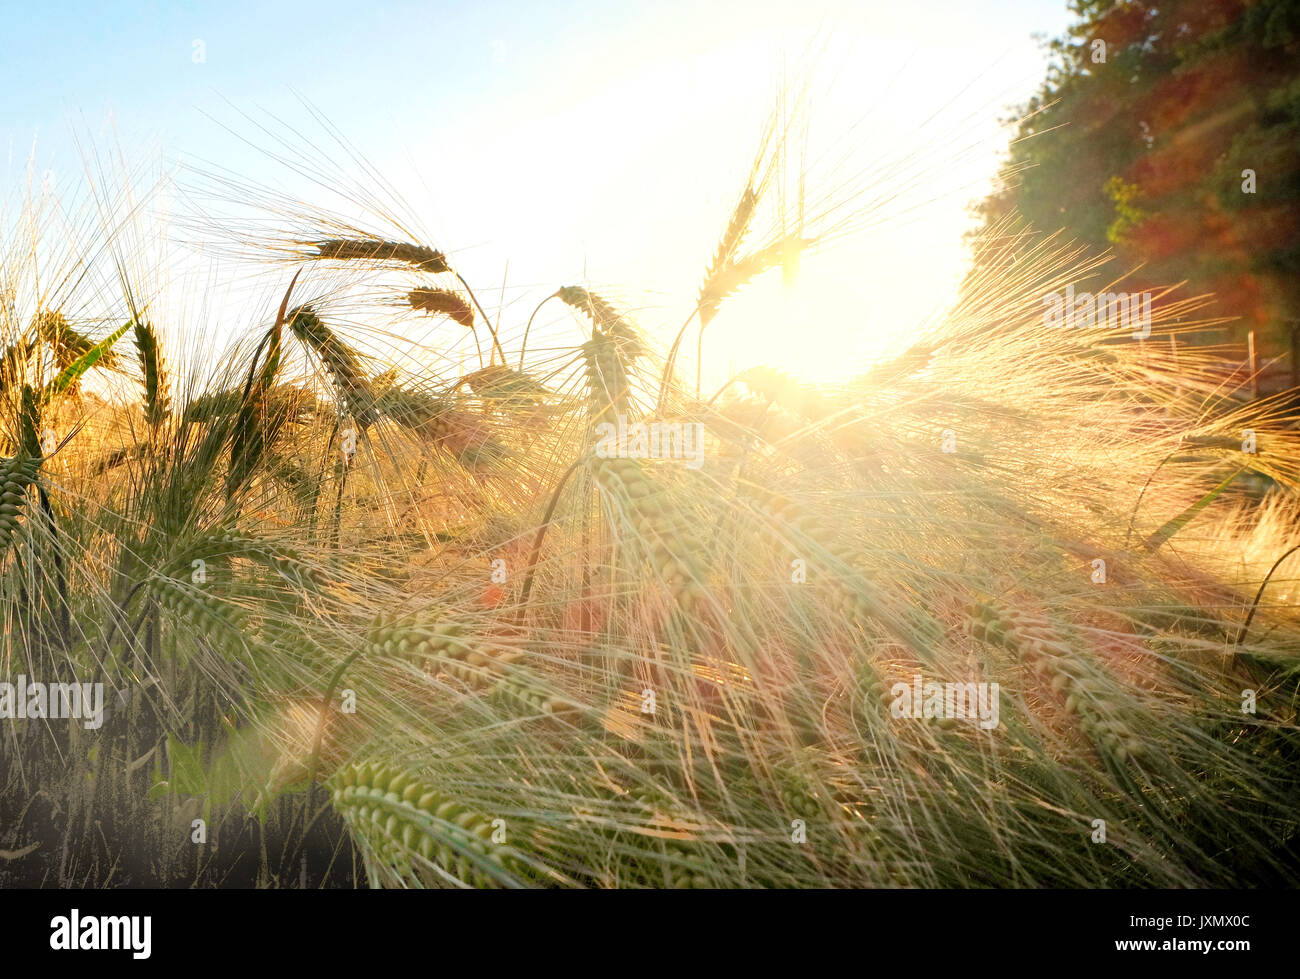 Sunlight on wheat field, Eastbourne, East Sussex, United Kingdom, Europe Stock Photo